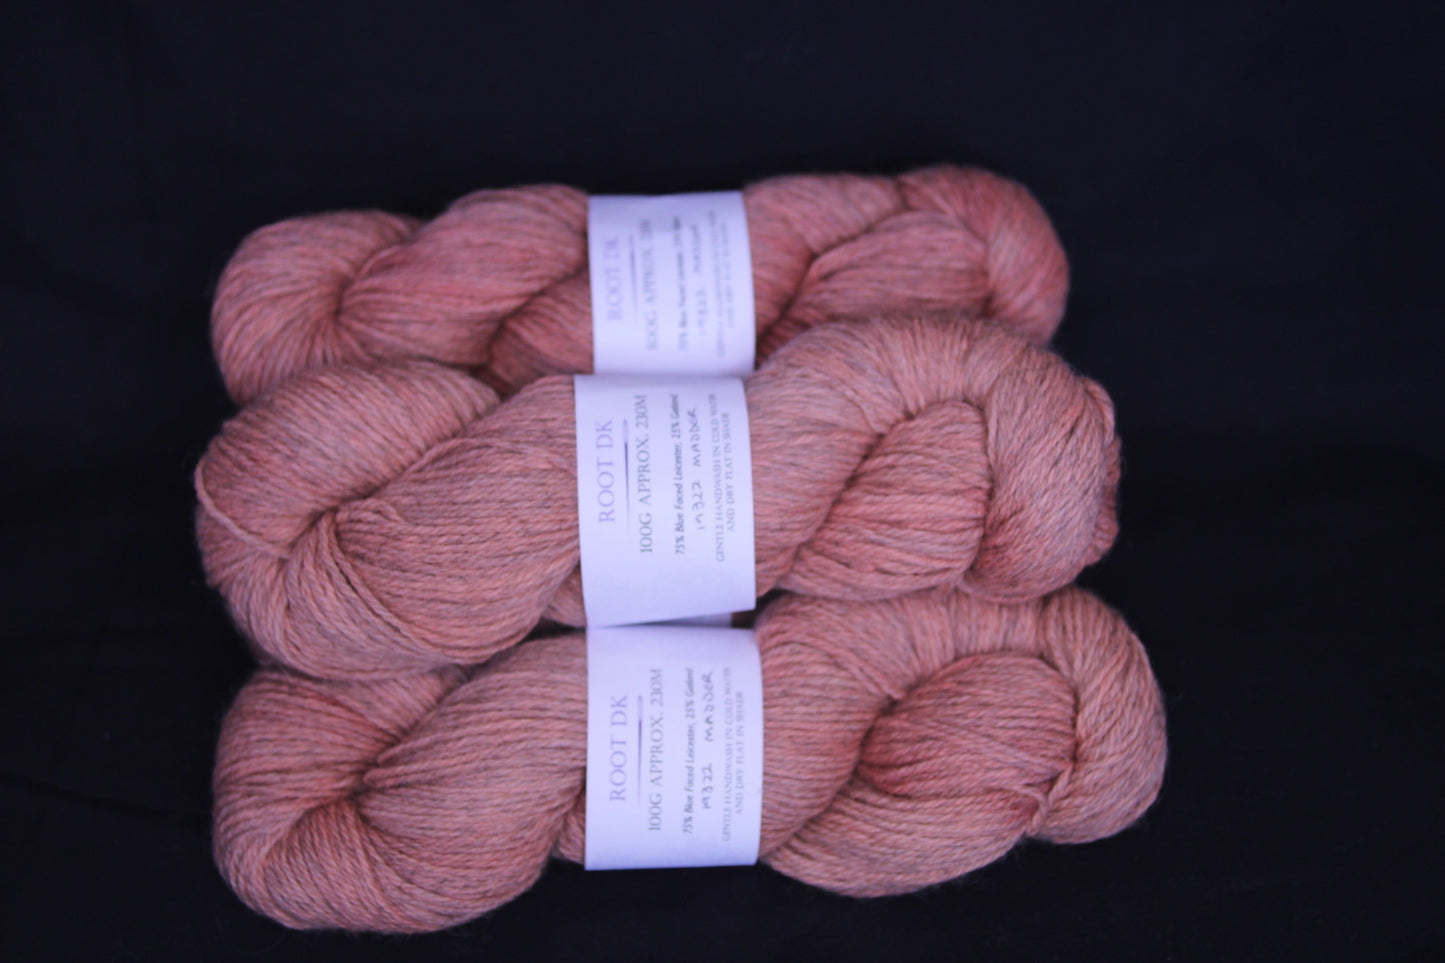 Orange double knit Blue Faced Leicester/Gotland